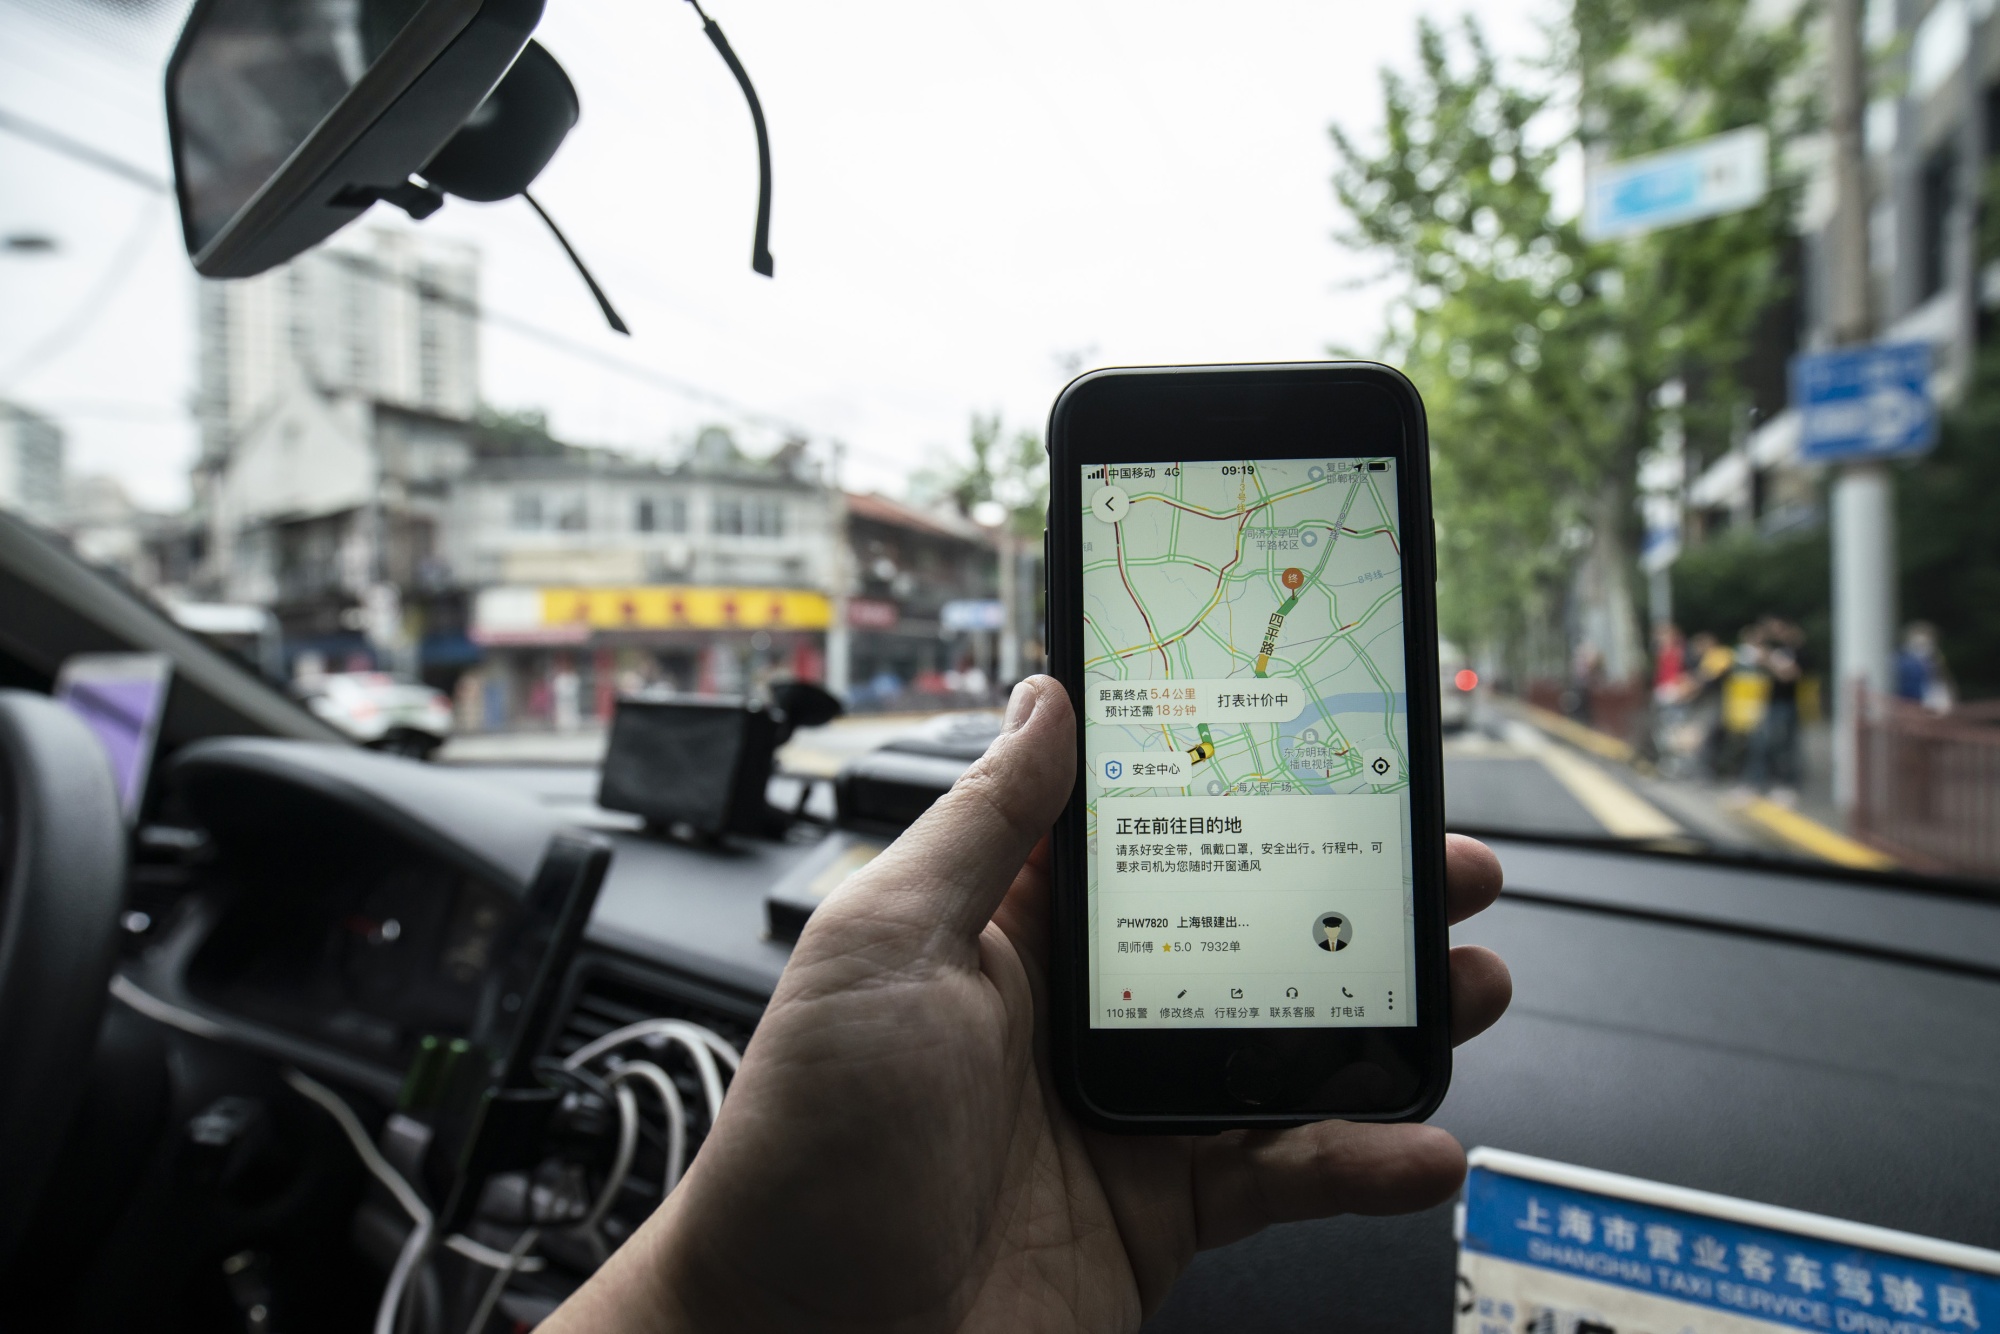 Didi prepares for a blockbuster US IPO to try and go 'truly international'